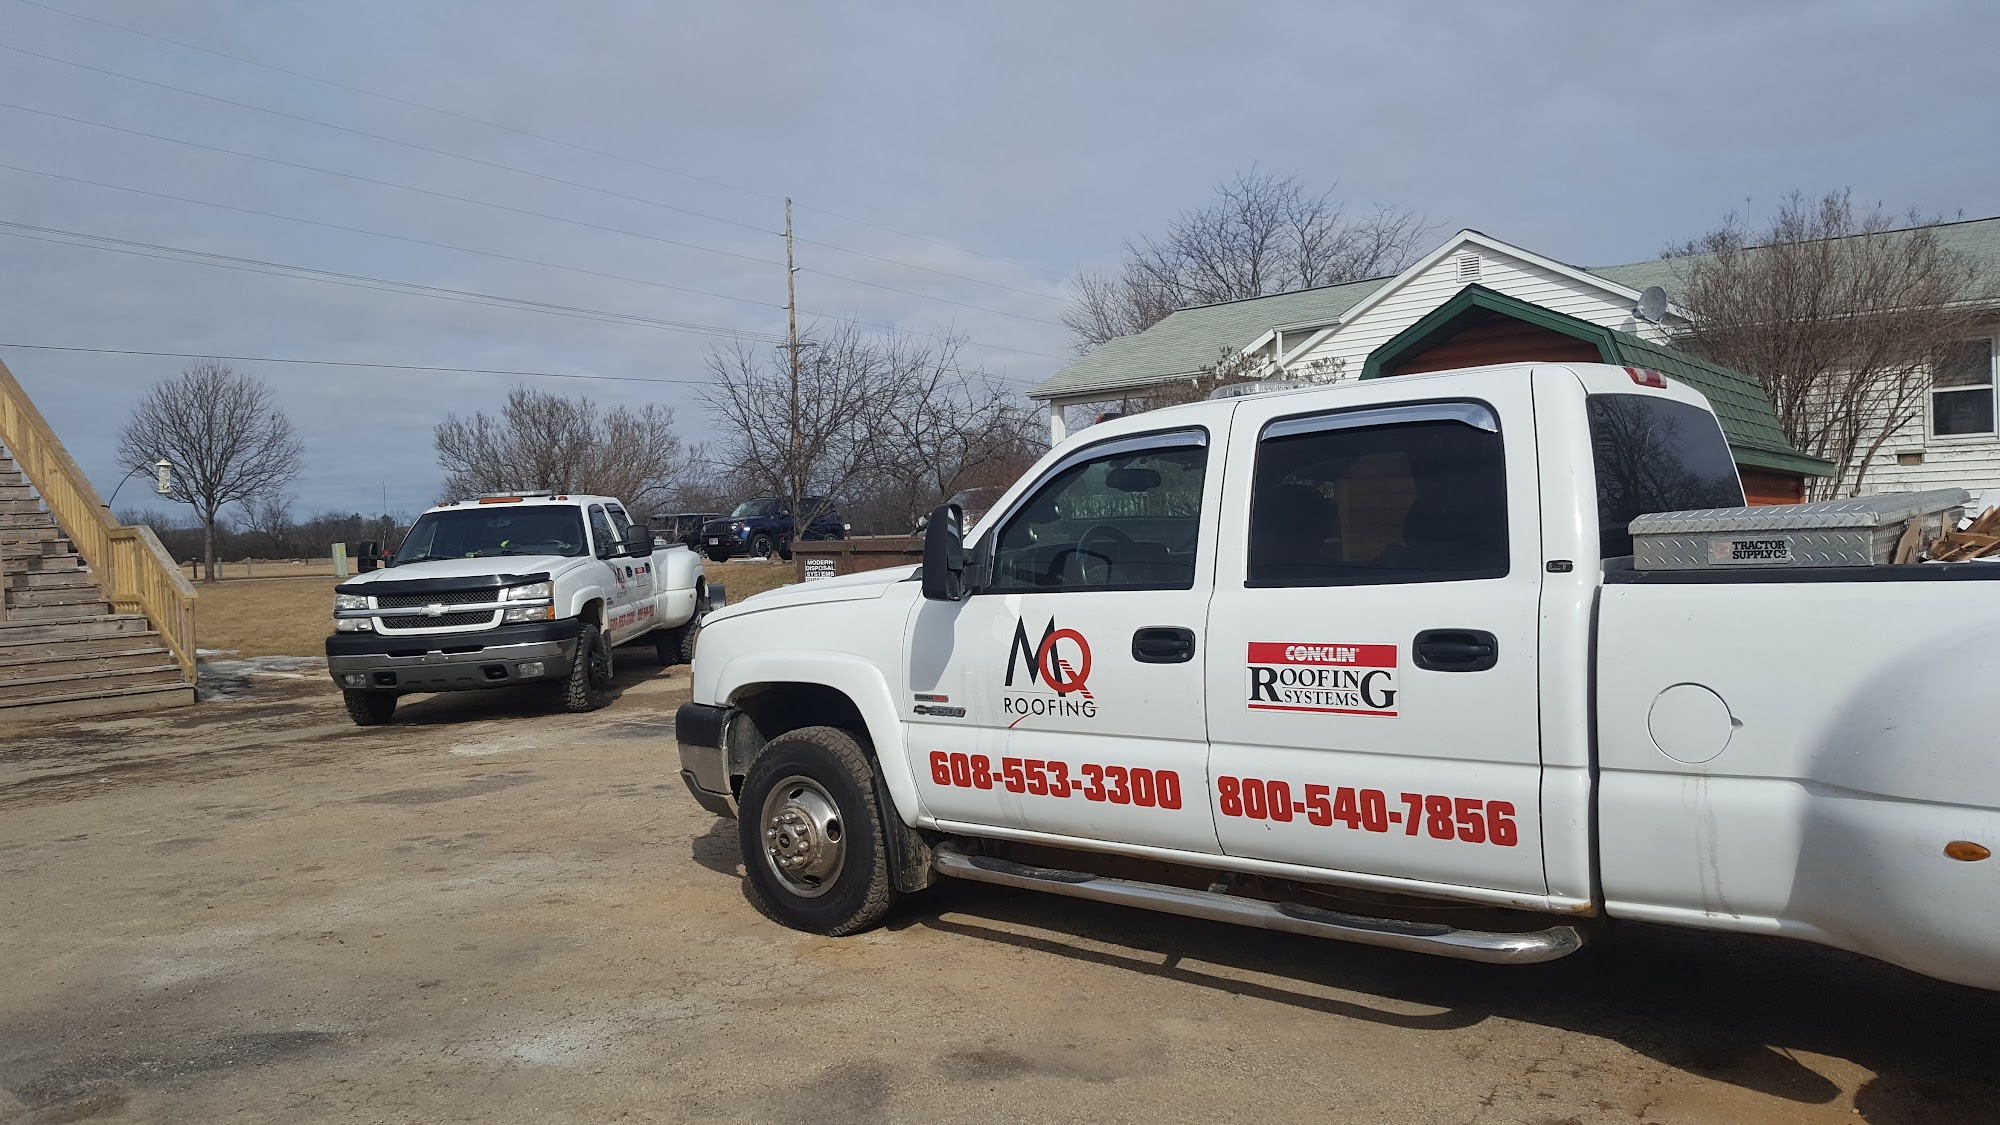 MQ Roofing 203 N Superior Ave, Tomah Wisconsin 54660